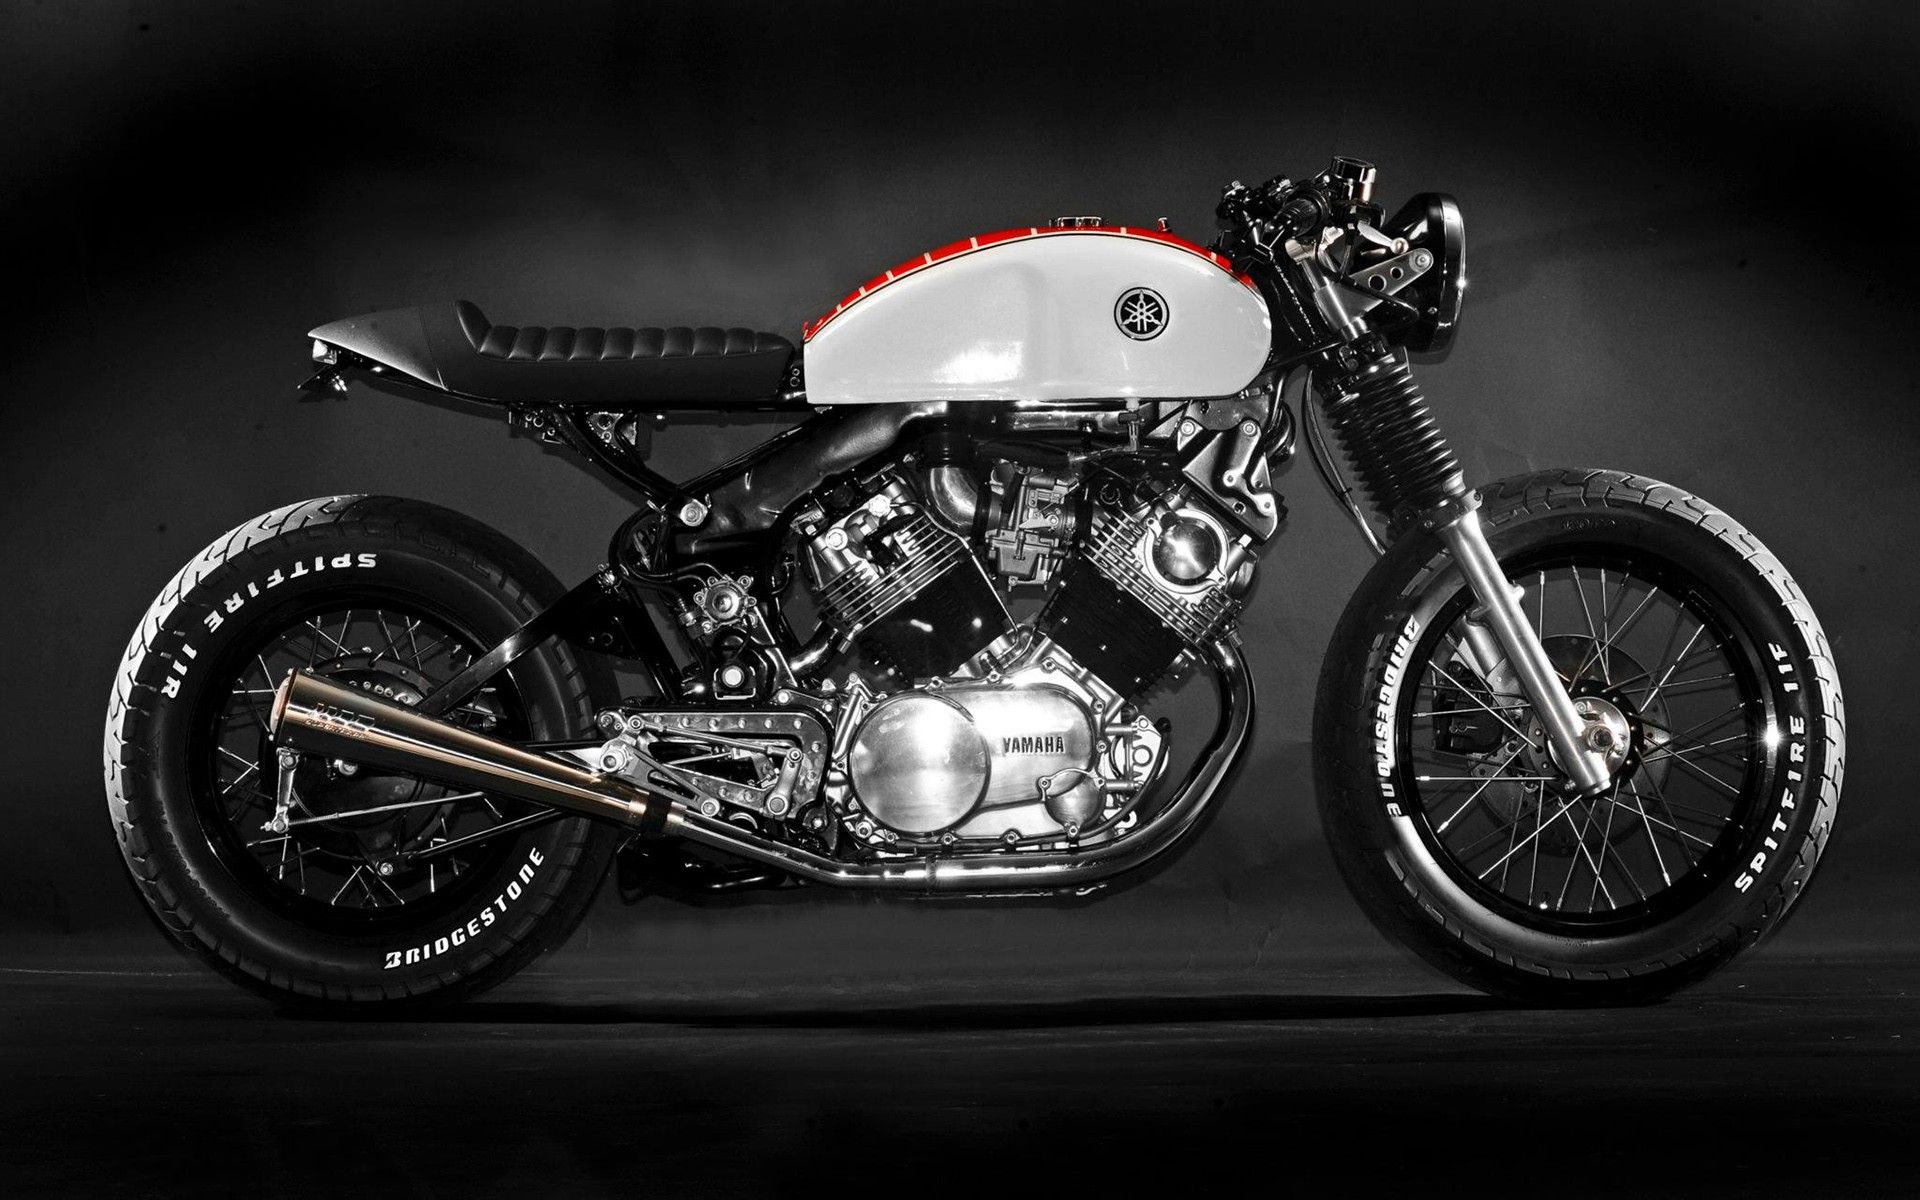 Top 5 Most Anticipated Café Racer bikes for 2016 - LatestMotorcycles.com